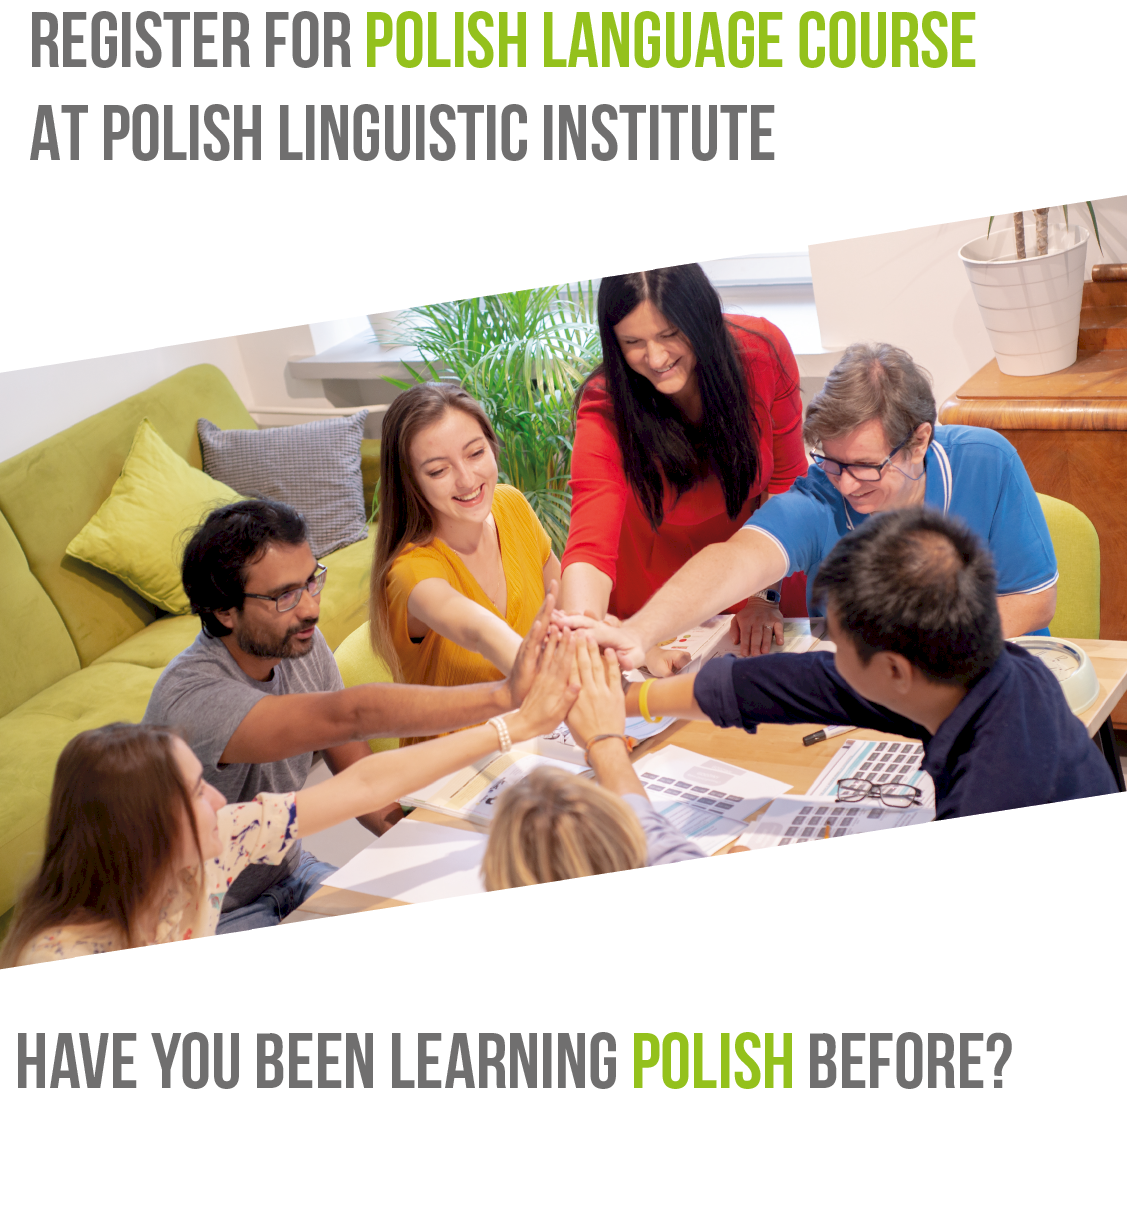 Have You been learning Polish language before?